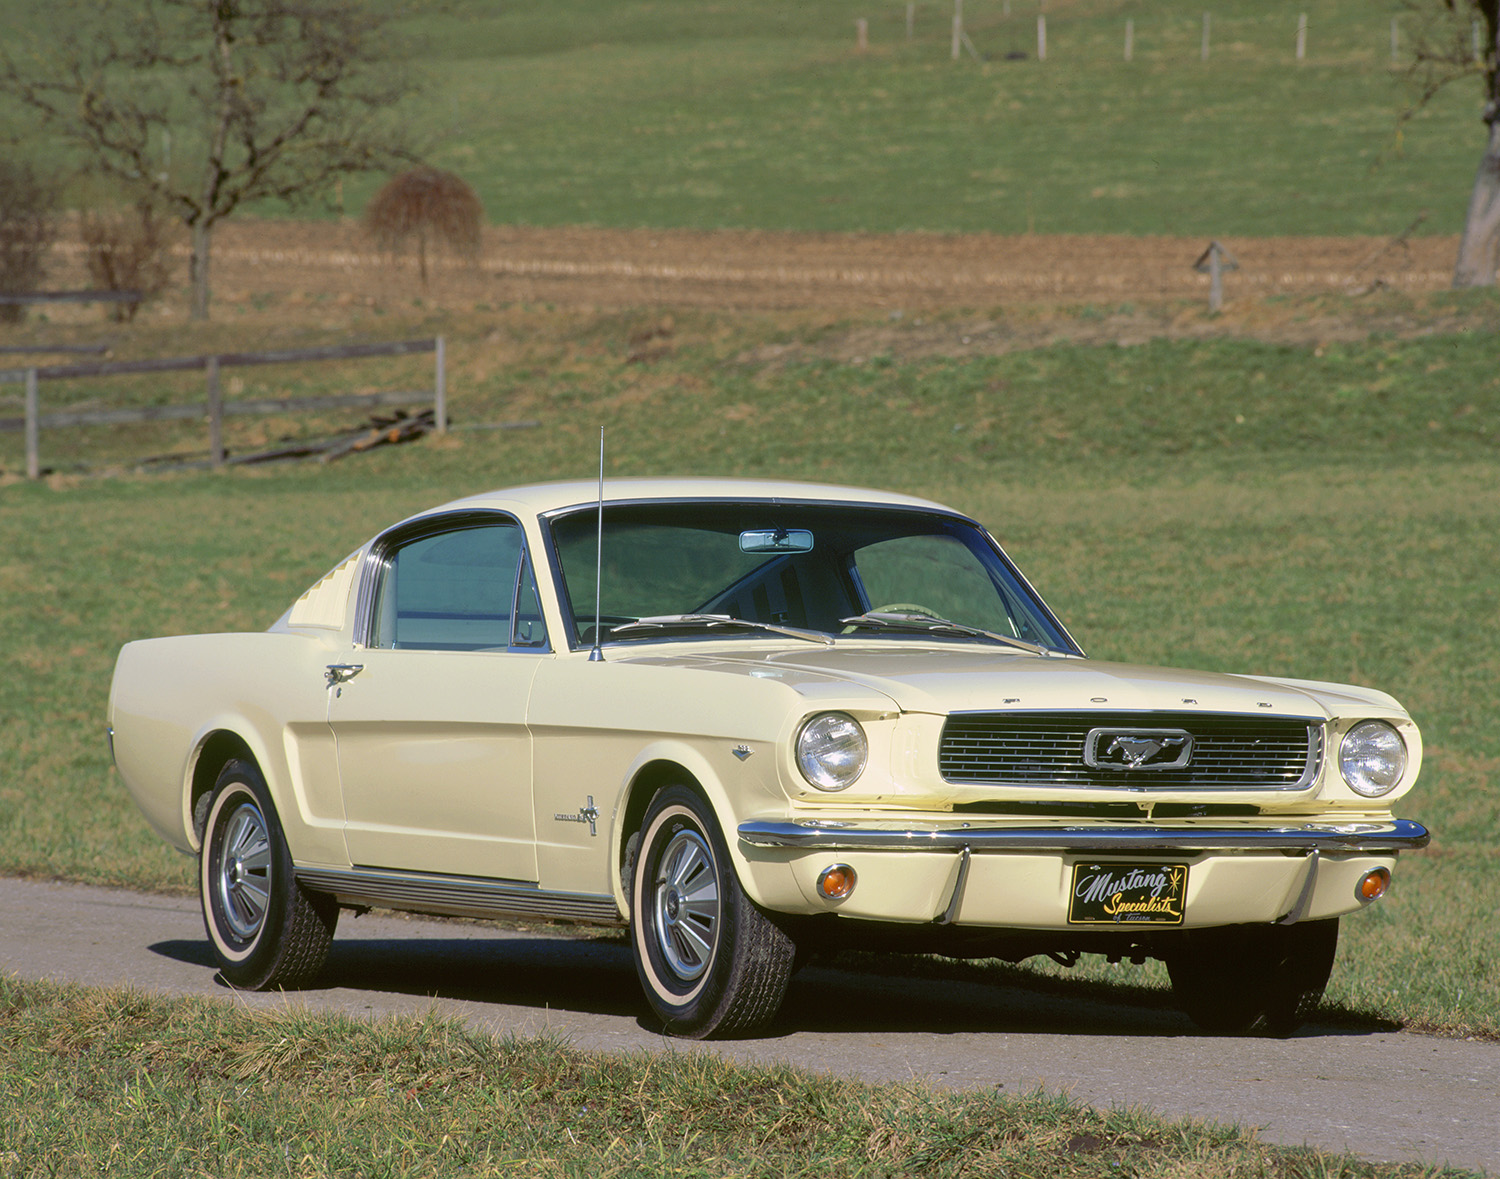 Wimbledon White 1966 Ford Mustang coupe front end driving down country road